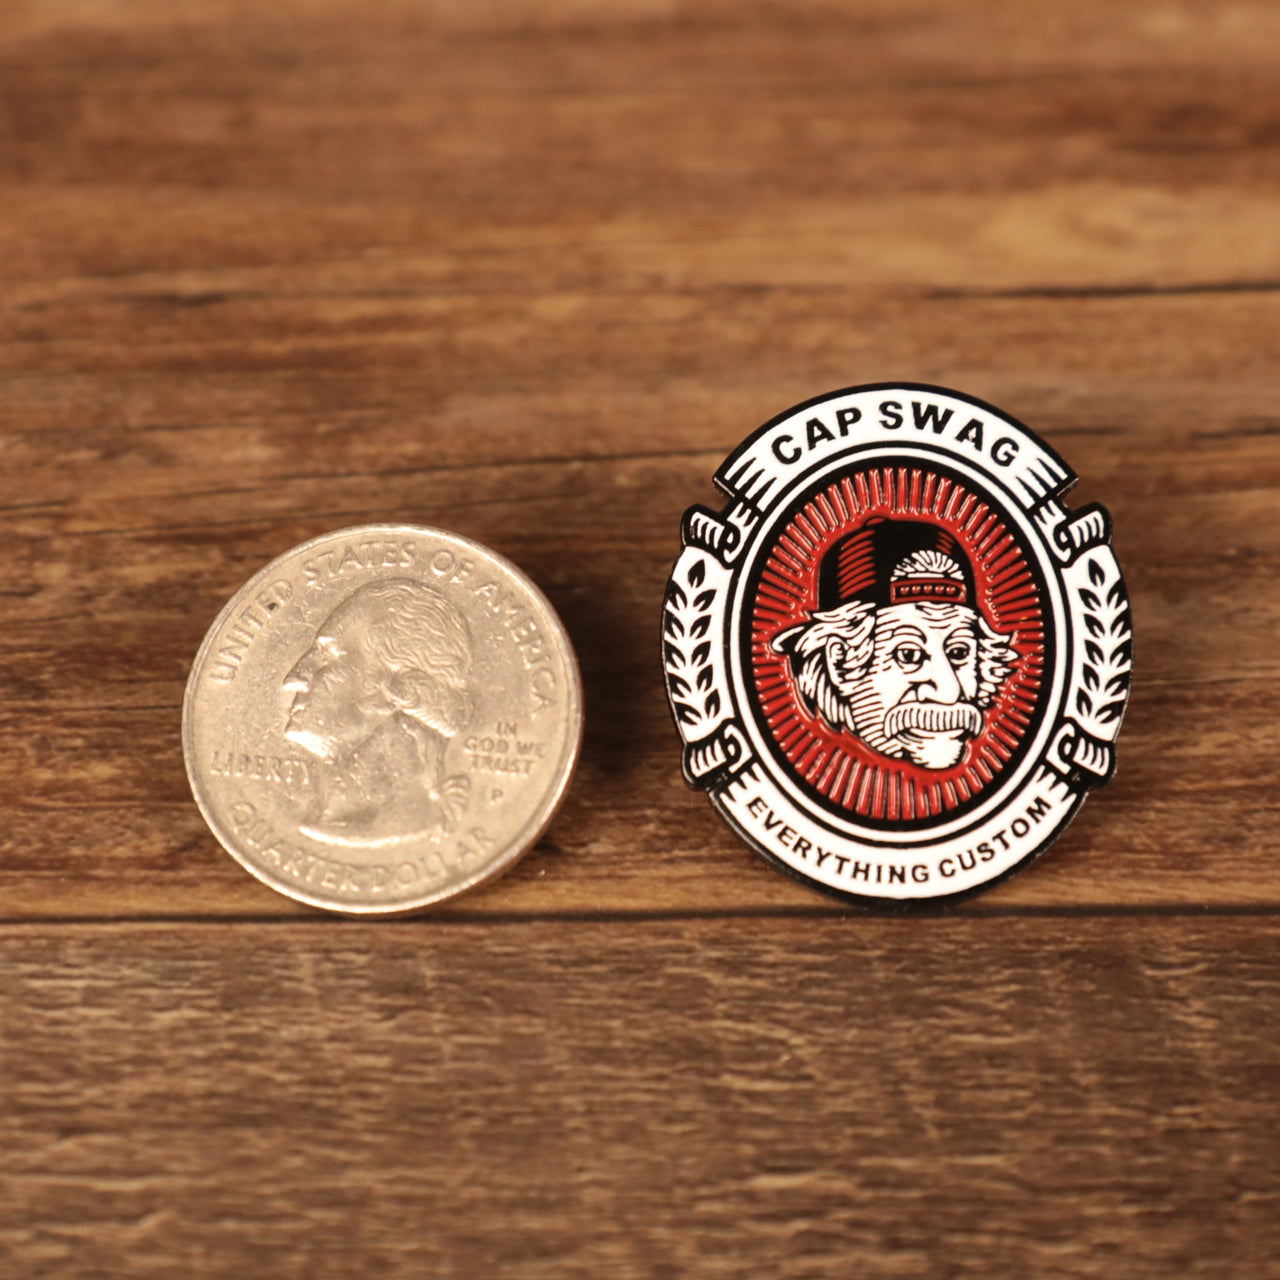 nohiosafariclub Shield Fitted Cap Pin | Enamel Pin For Hat